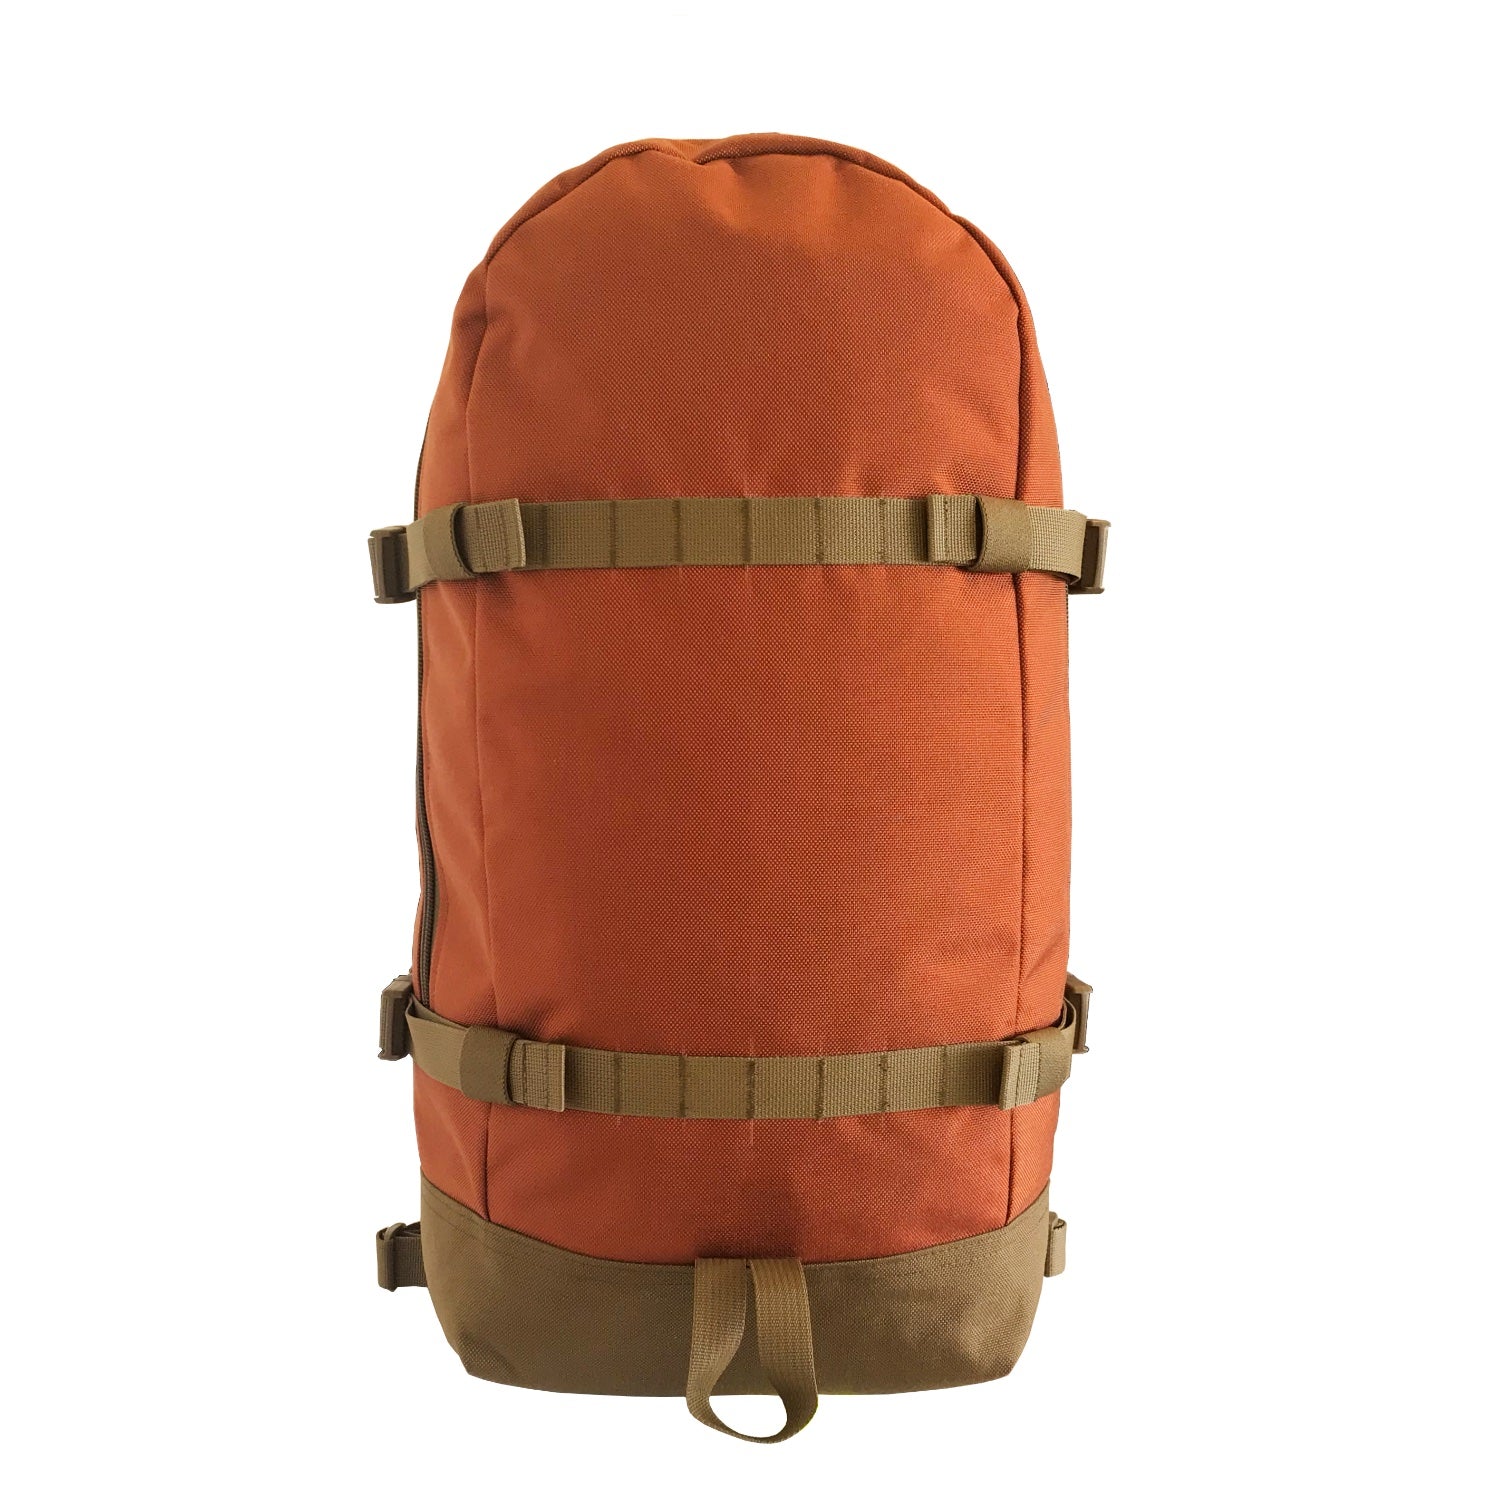 DIY sewing pattern for a backpack to make your own gear (MYOG)